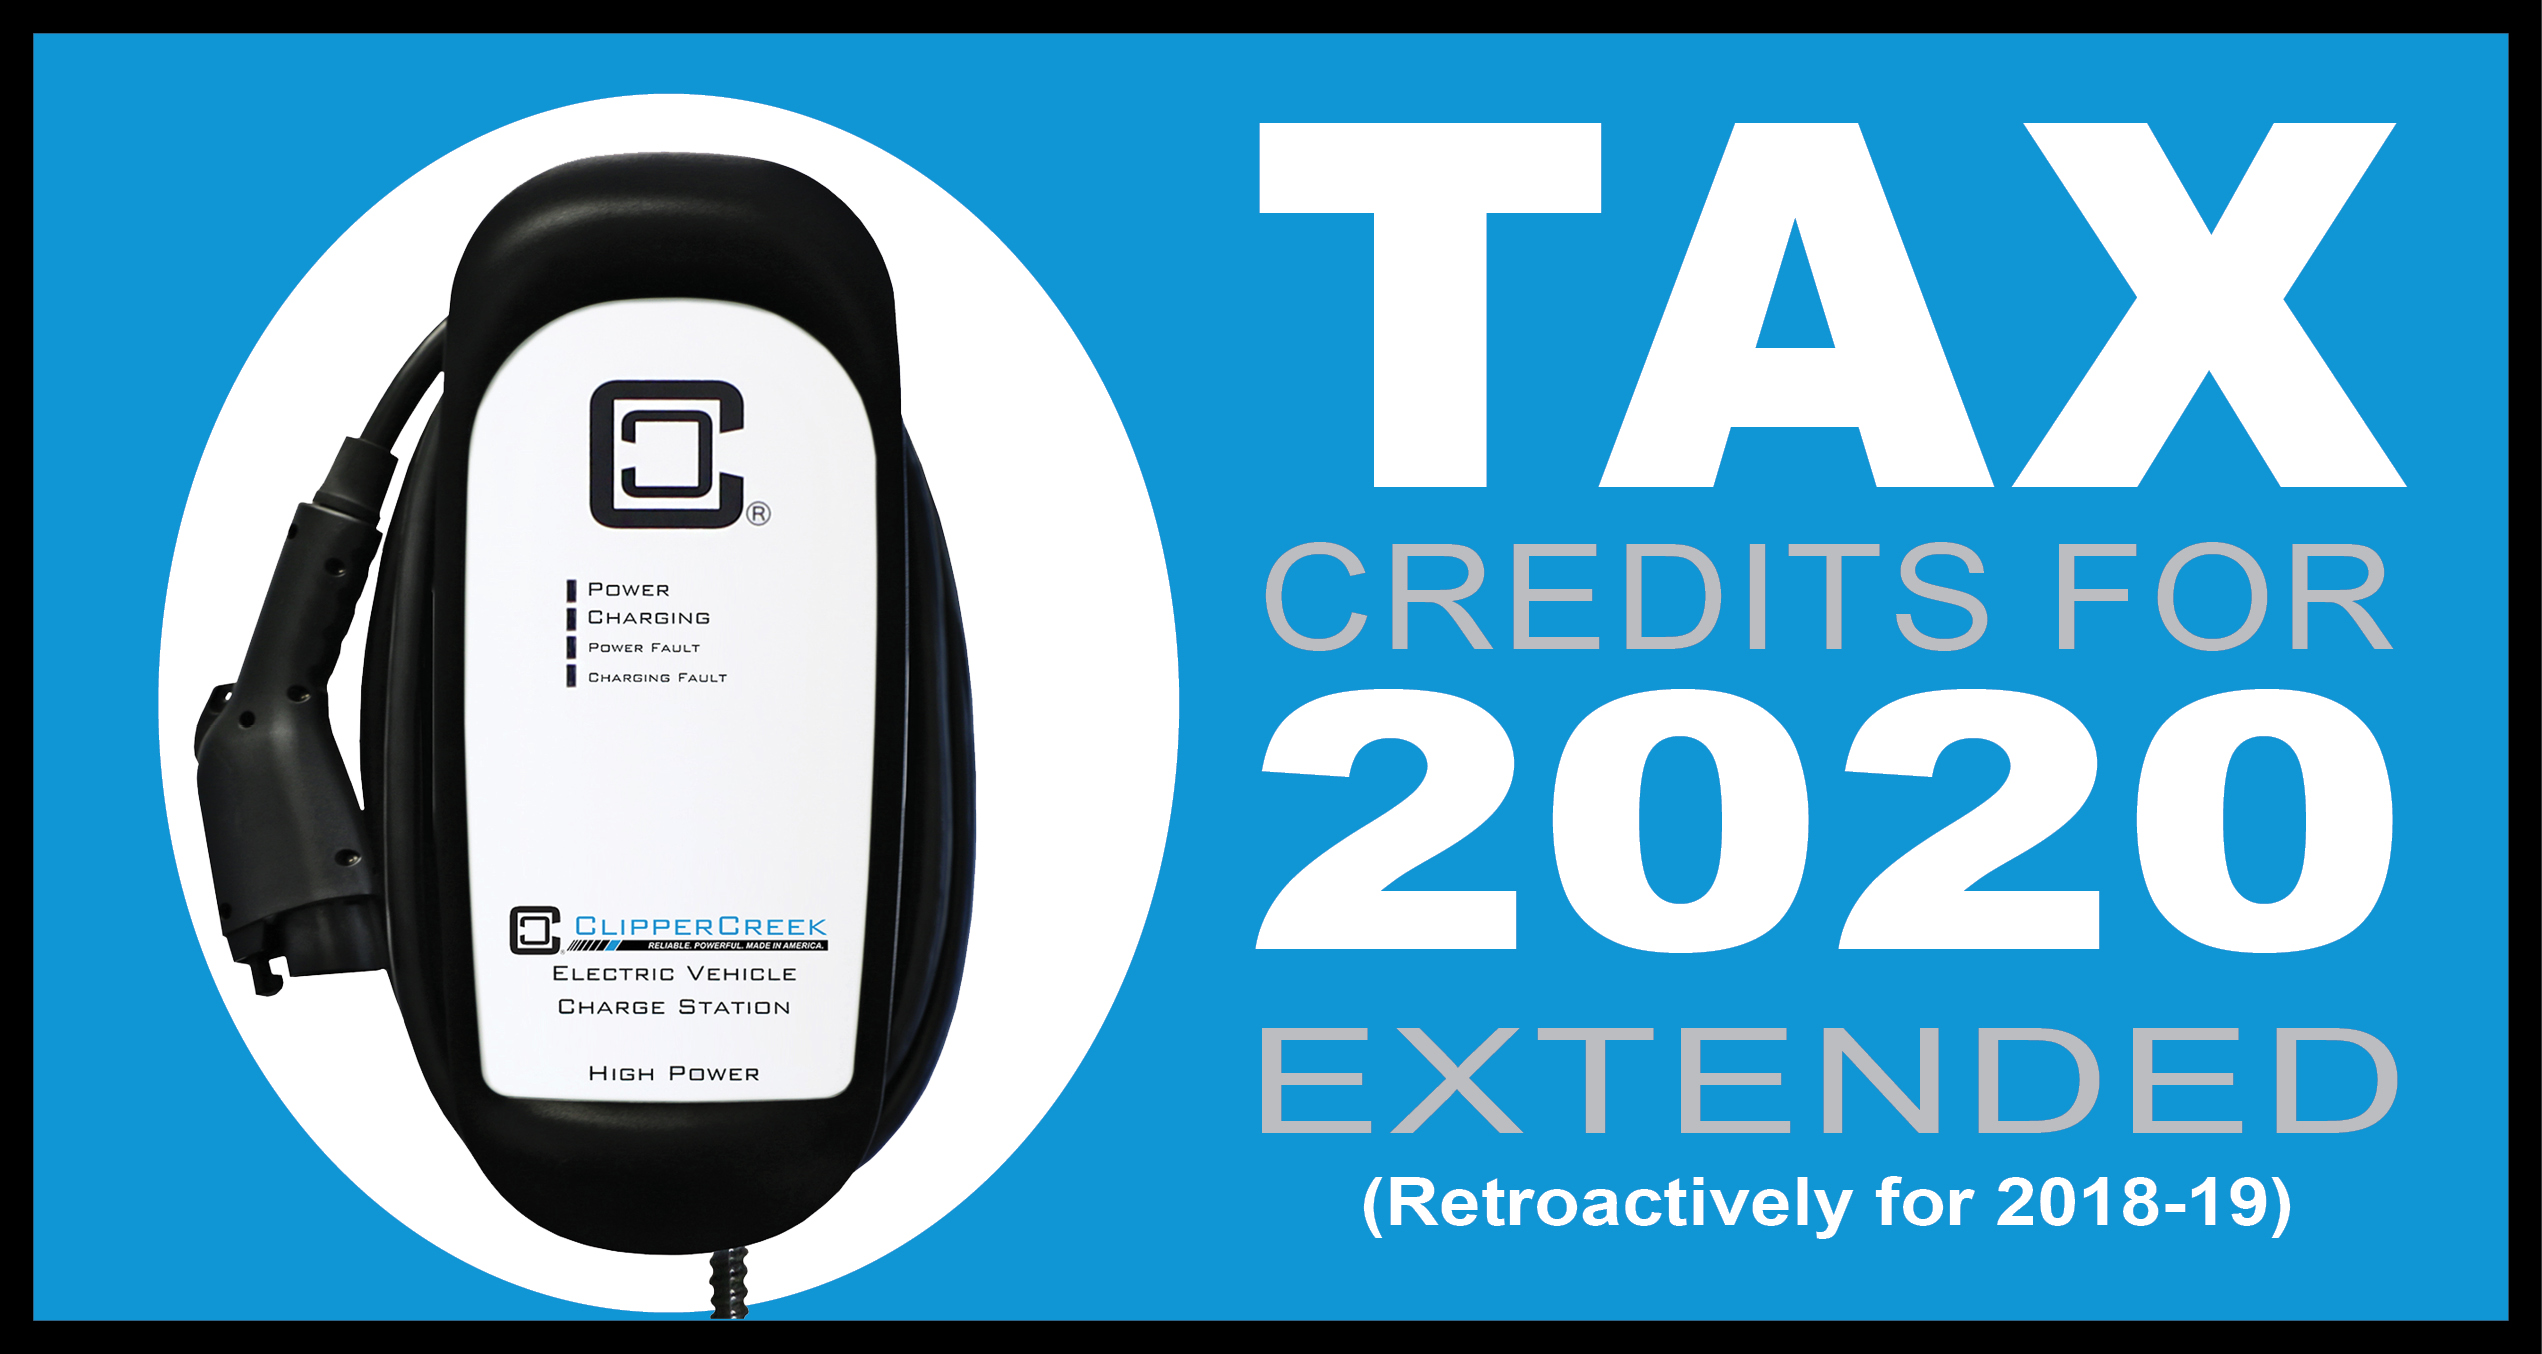 the-federal-ev-charger-tax-credit-is-back-for-2023-what-to-know